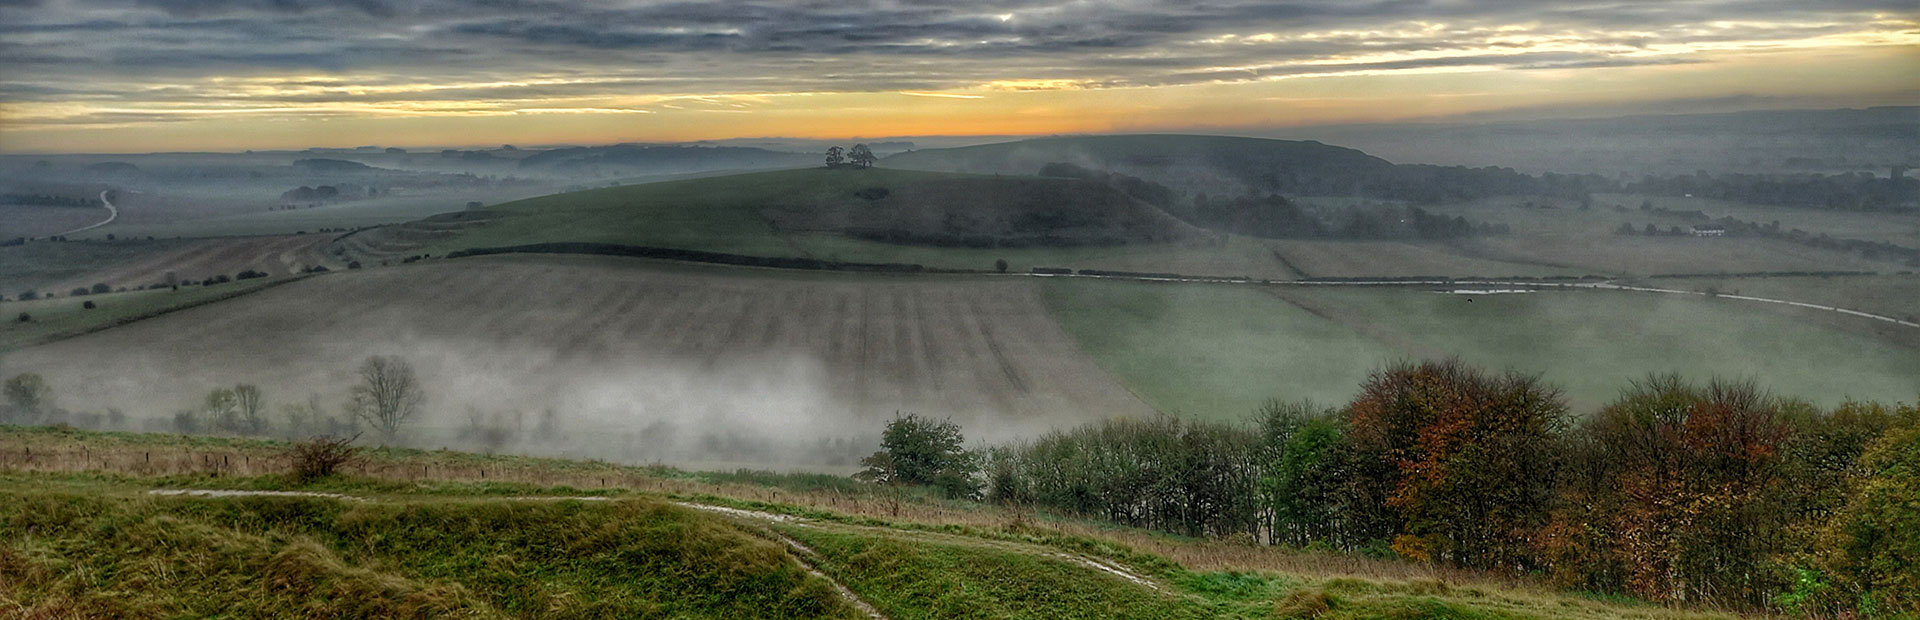 A misty view from the hill